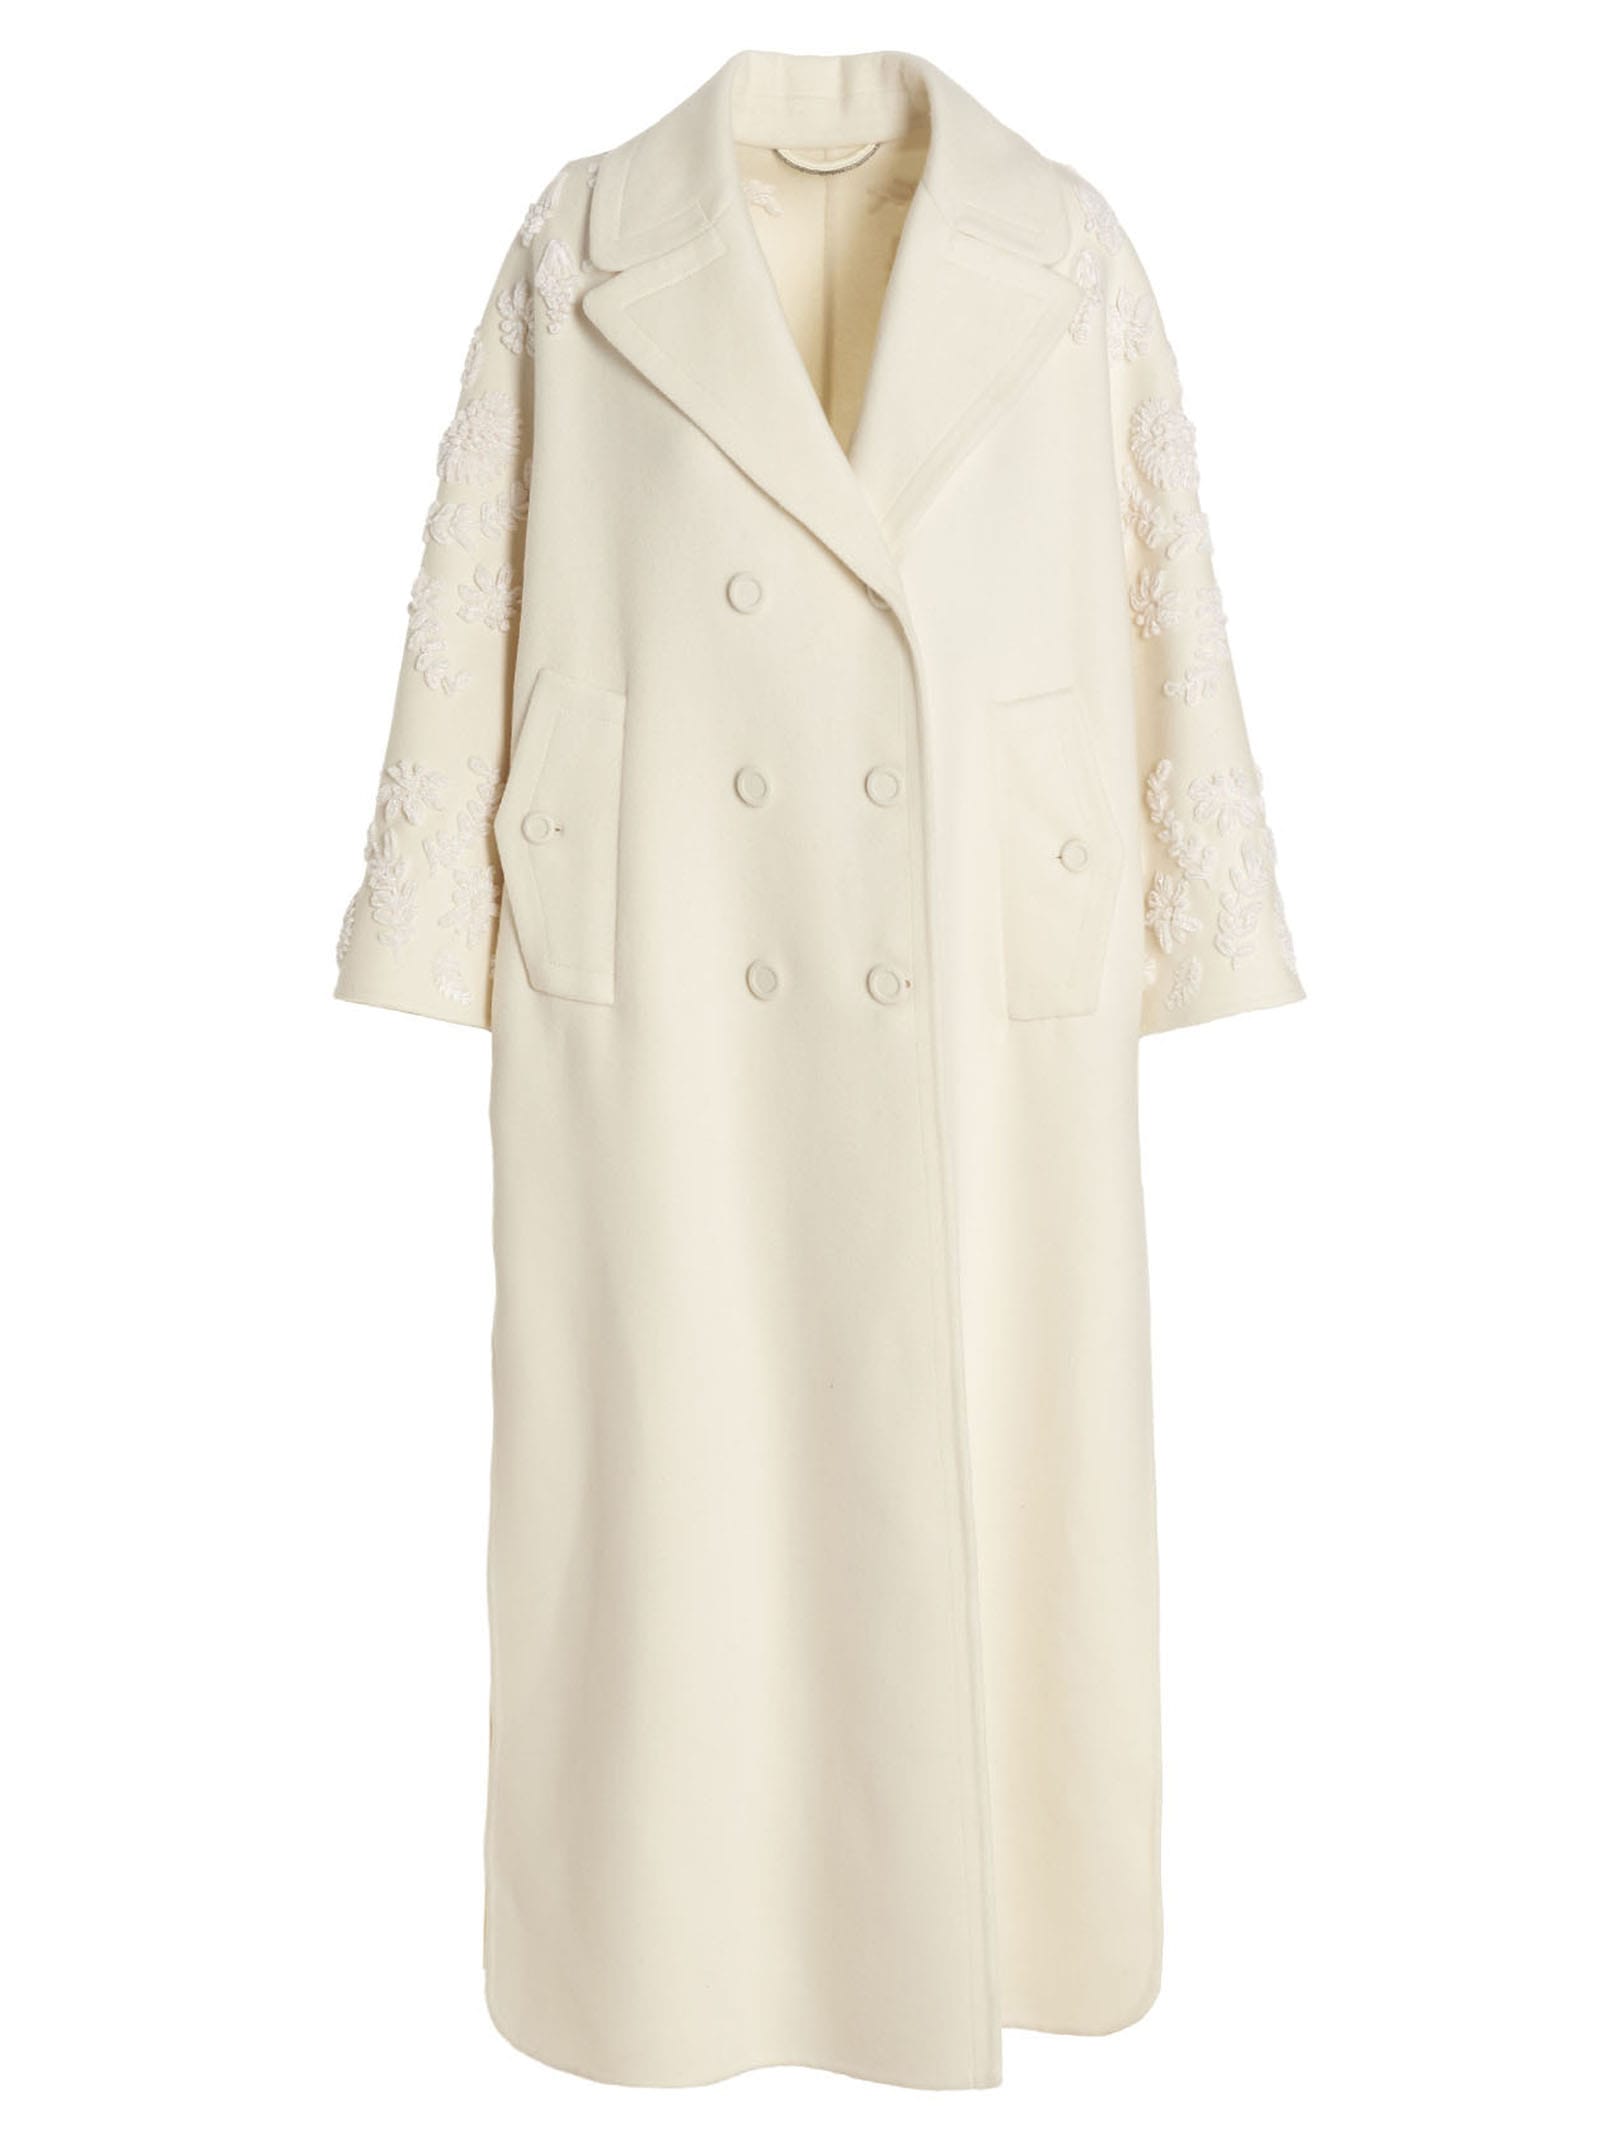 Ermanno Scervino Double Breast Embroidery Flower Coat